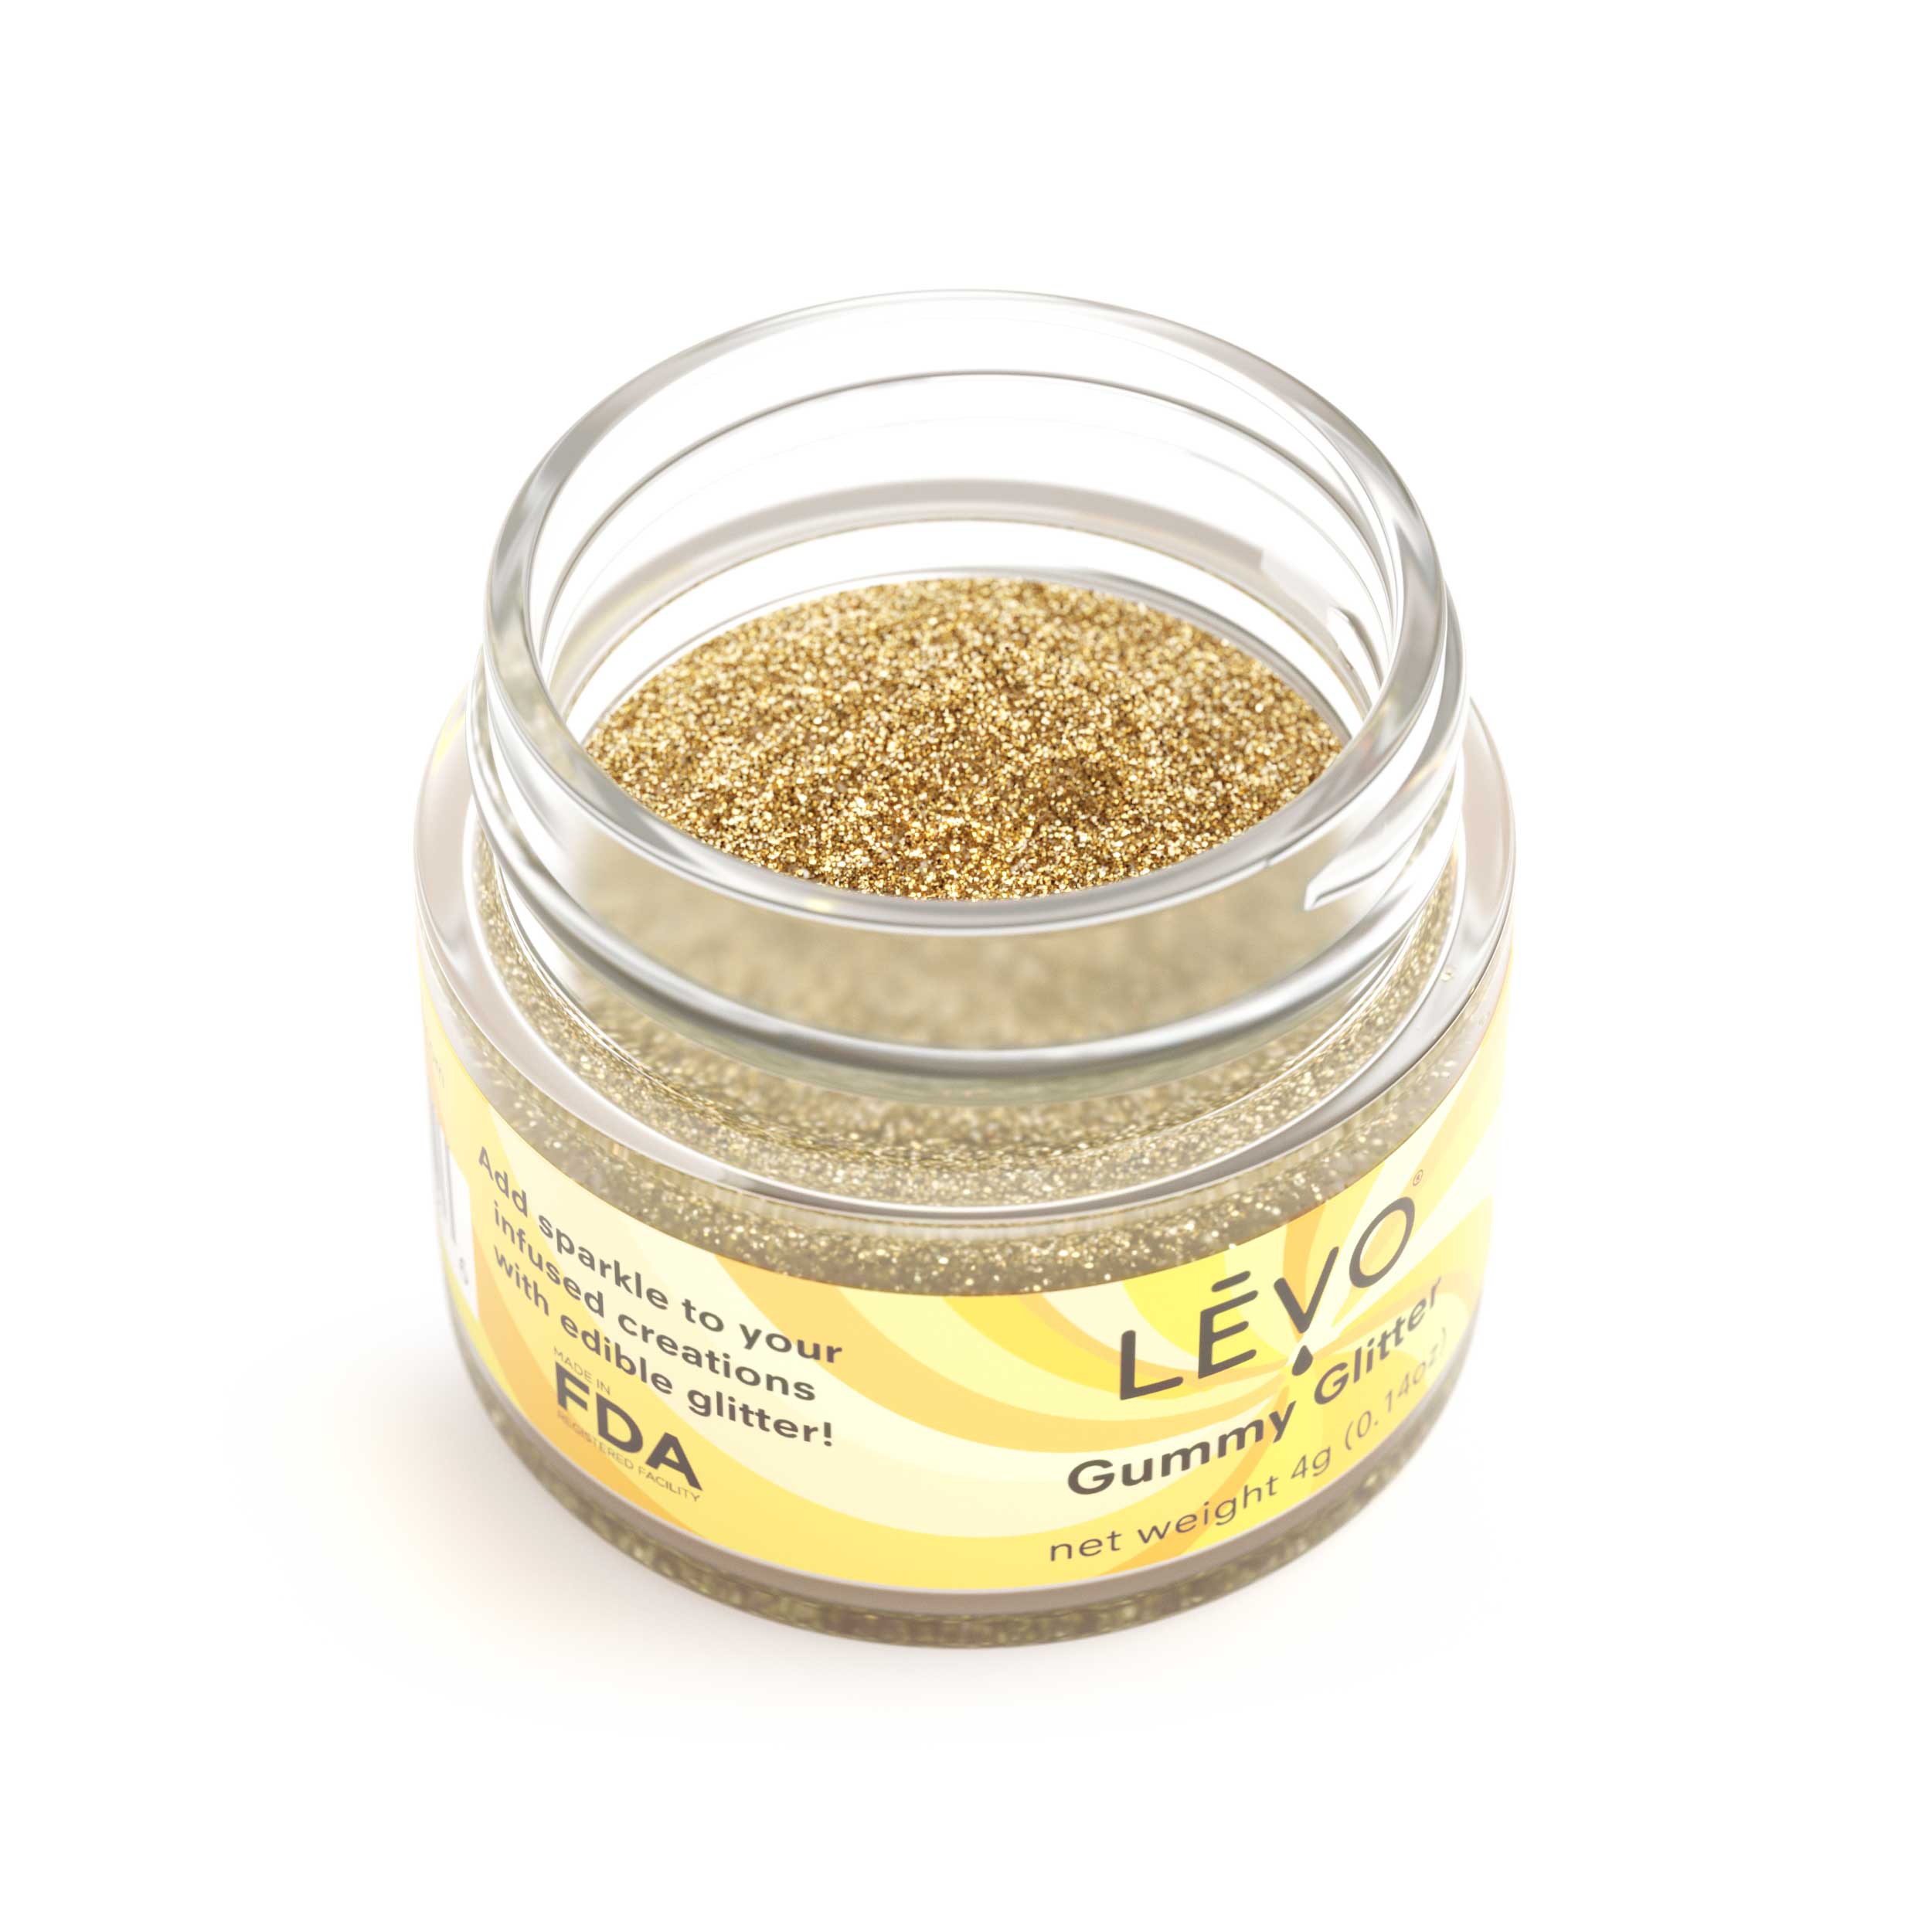 LEVO Gold Gummy Glitter made in an FDA approved facility, made in the USA. Add gold glitter to your infused gummies, dust your chocolate covered strawberries, or top your cupcakes. Enhance your cupcakes, cookies, and more with the shimmering effects of the Gummy Glitter + Infusion Shimmer Kit.